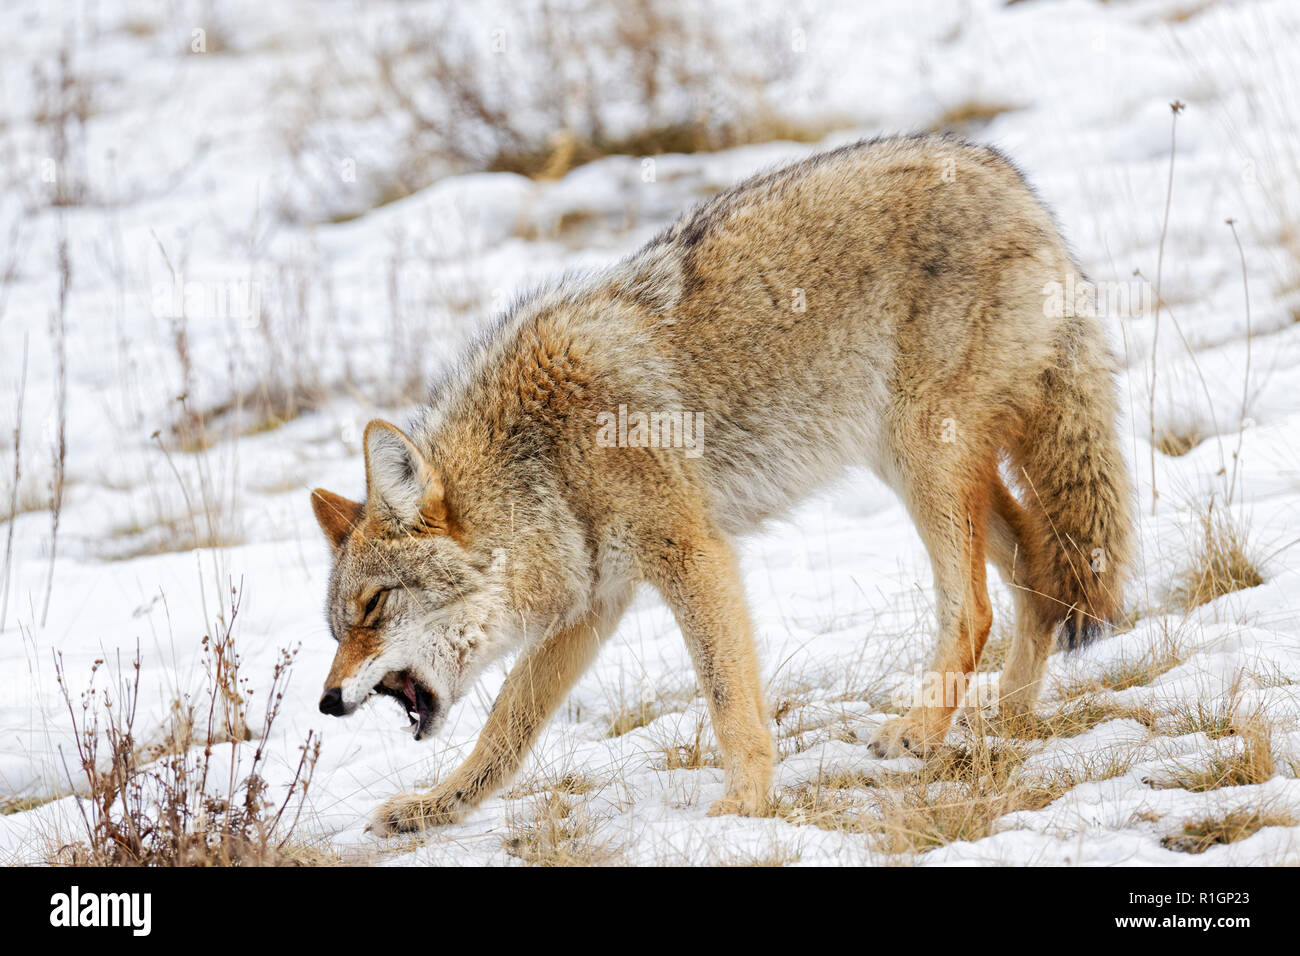 42,757.09725 close up coyote standing head down coughing choking to dislodge food caught in mouth throat, cold winter snow snowy grassy hillside Stock Photo